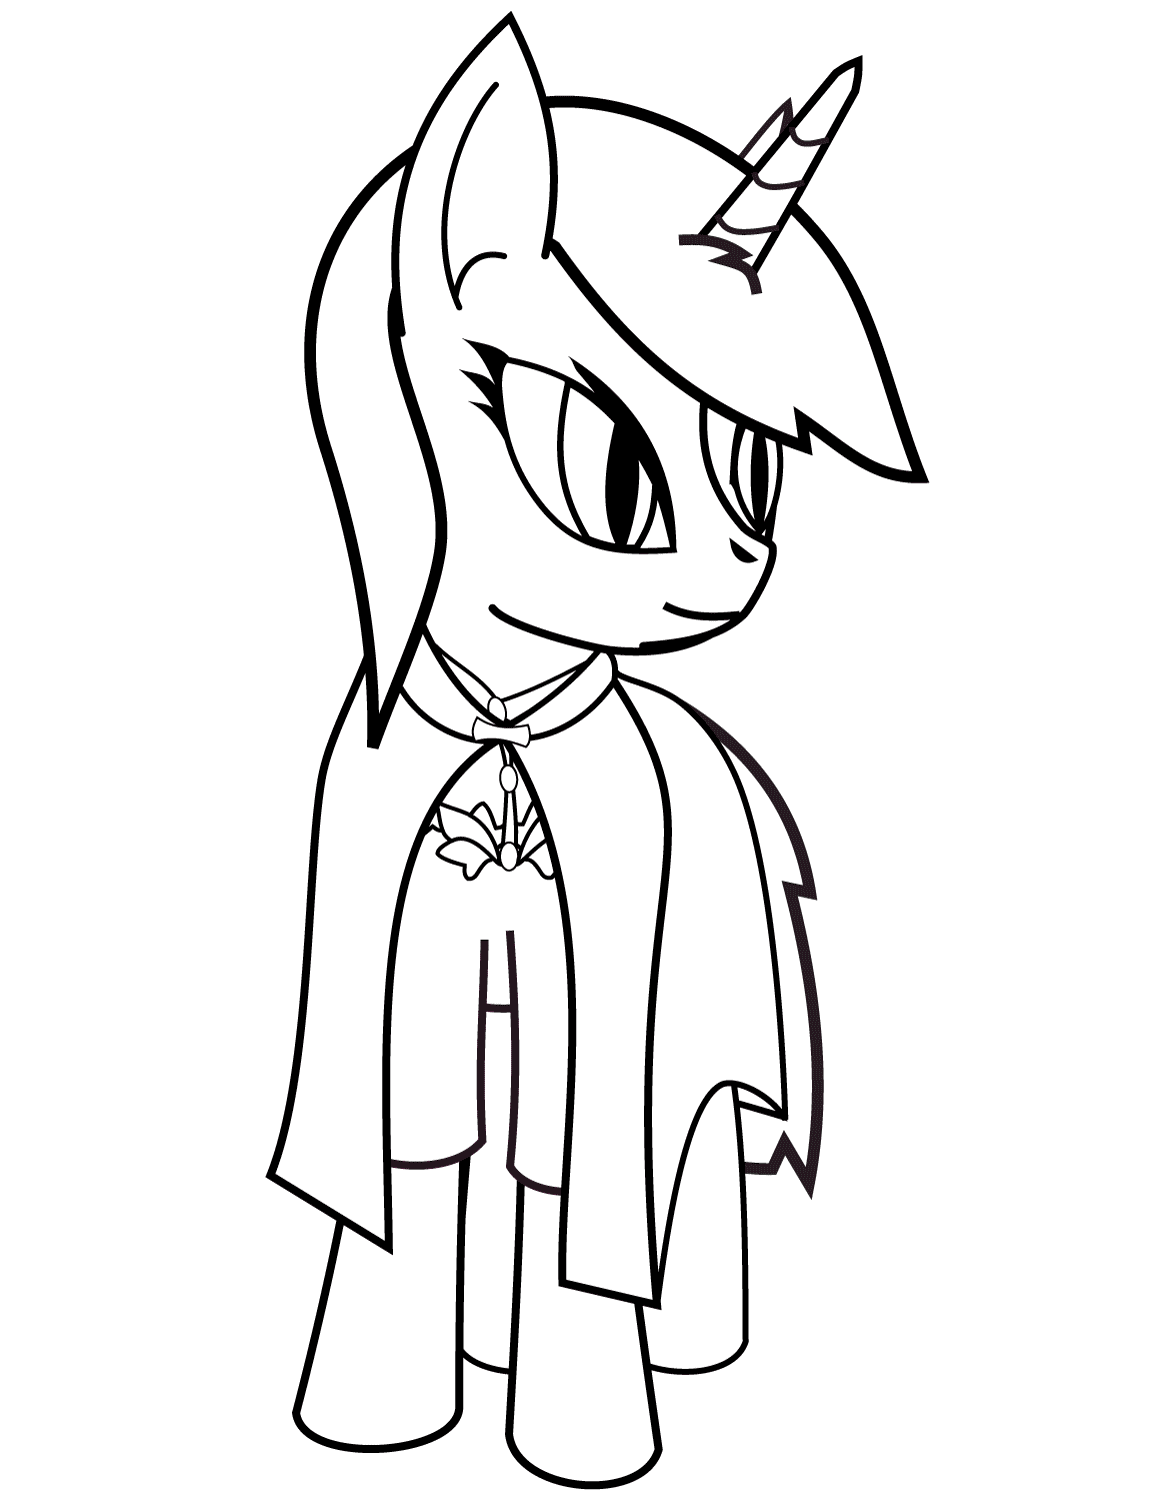 Cute Pony Unicorn Coloring Page